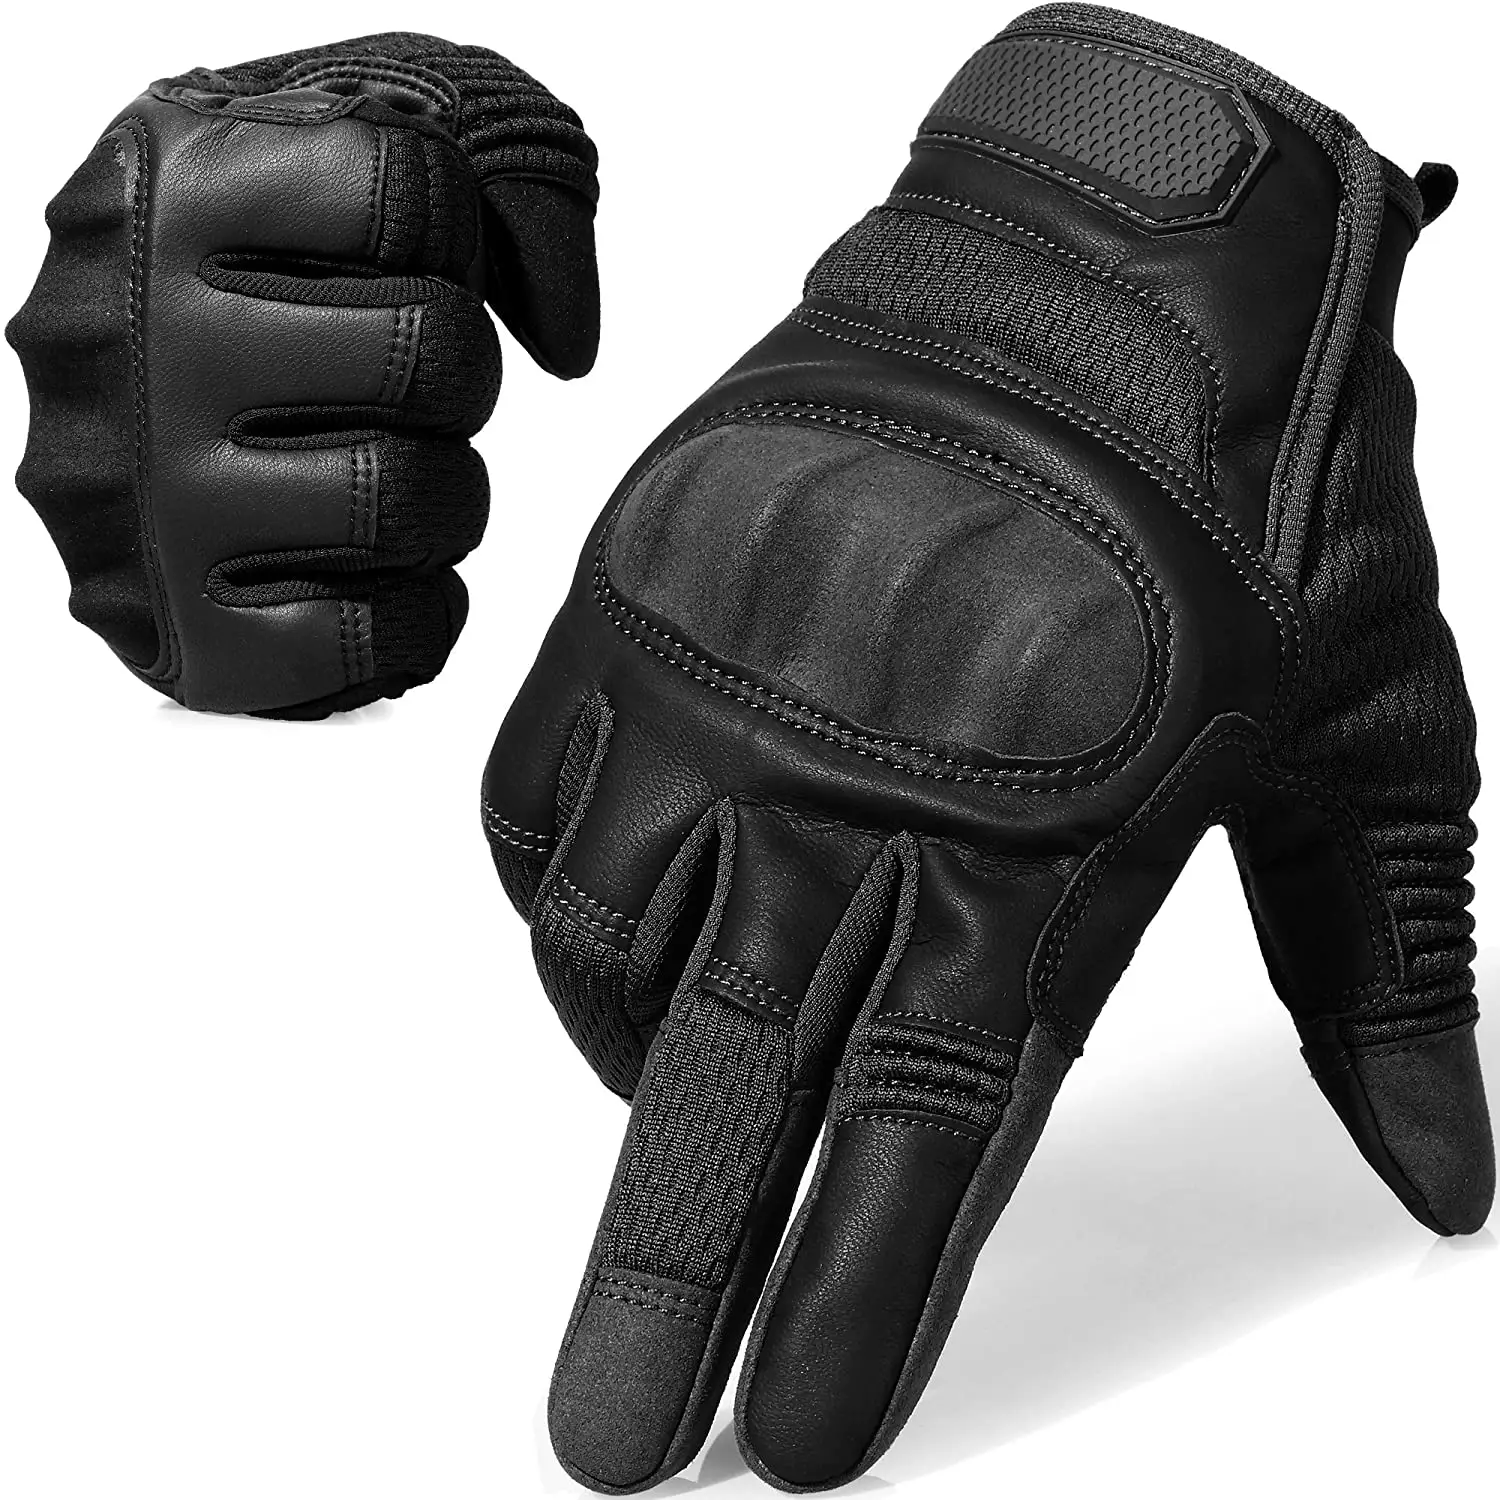 Custom Motorbike Gloves high quality leather bike racing gloves with hard molded plastic protection for hands gloves for bikers